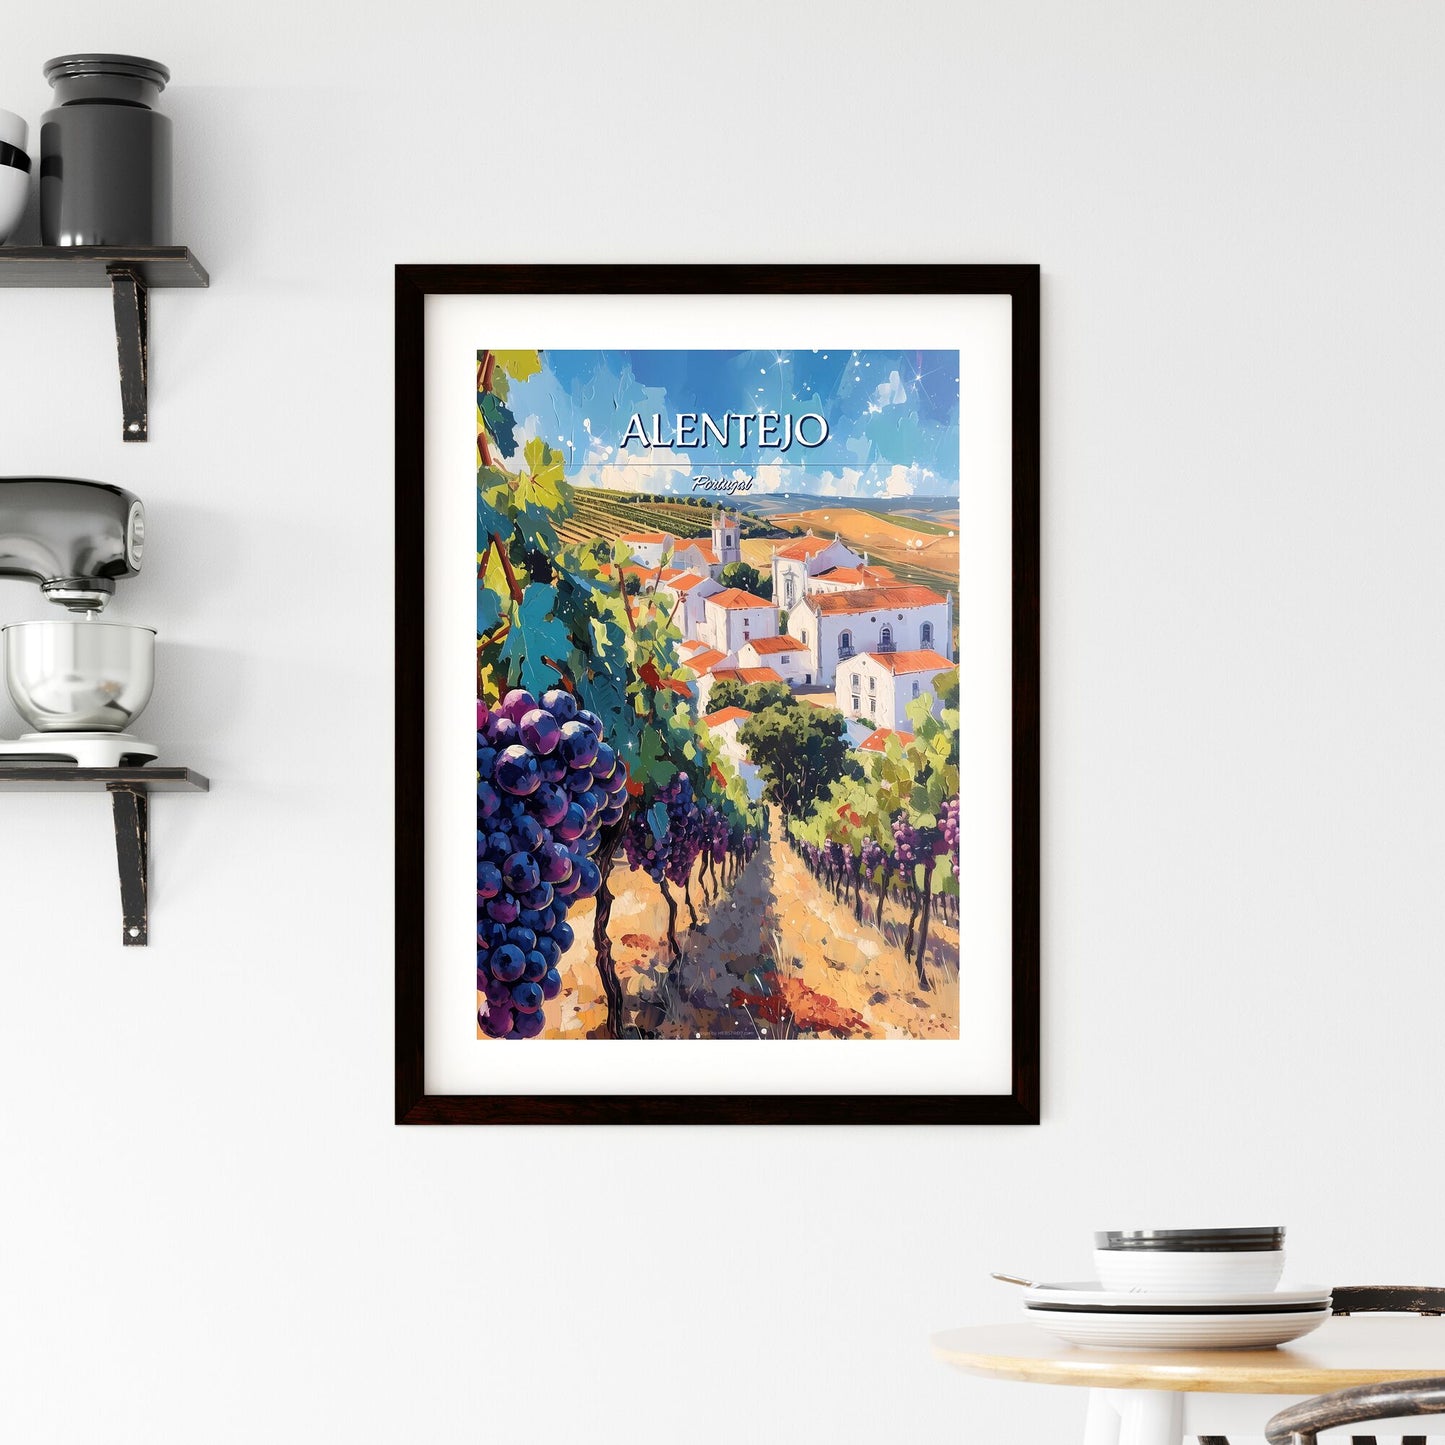 Alentejo, Portugal - Art print of a painting of a vineyard with grapes Default Title